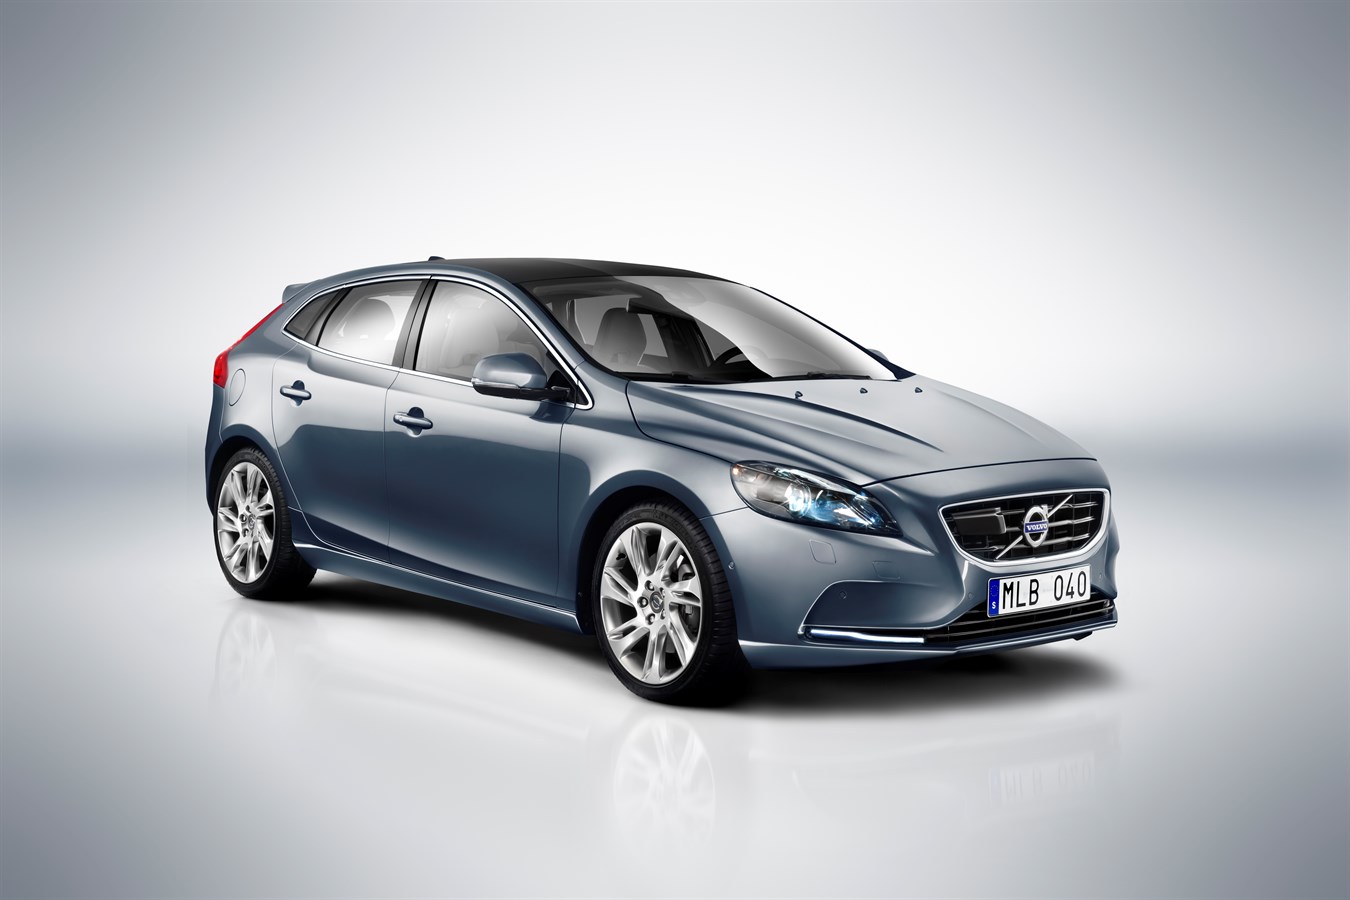 The all-new Volvo V40 – Market: Sharpened feel and features from larger  Volvos dressed up in a compact hatchback - Volvo Cars Global Media Newsroom